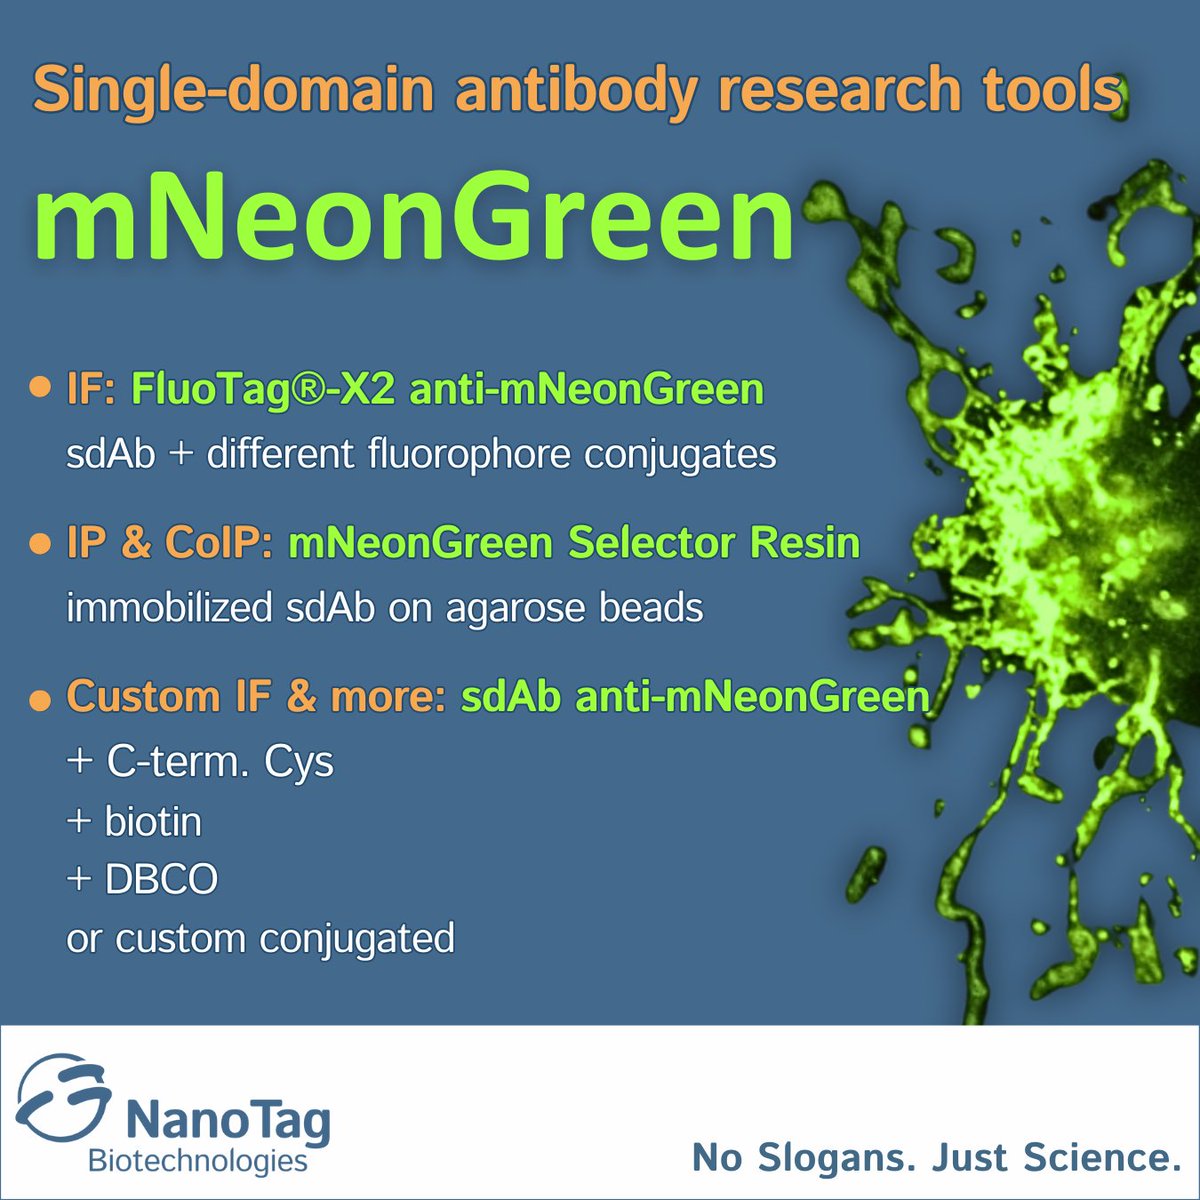 At NanoTag, we've developed a range of #nanobodies tailored for mNeonGreen 🧪. These small, monovalent binders recognize their antigens with strong affinity and specificity, representing ideal research tools for diverse applications. Check them here: bit.ly/44a2a5K